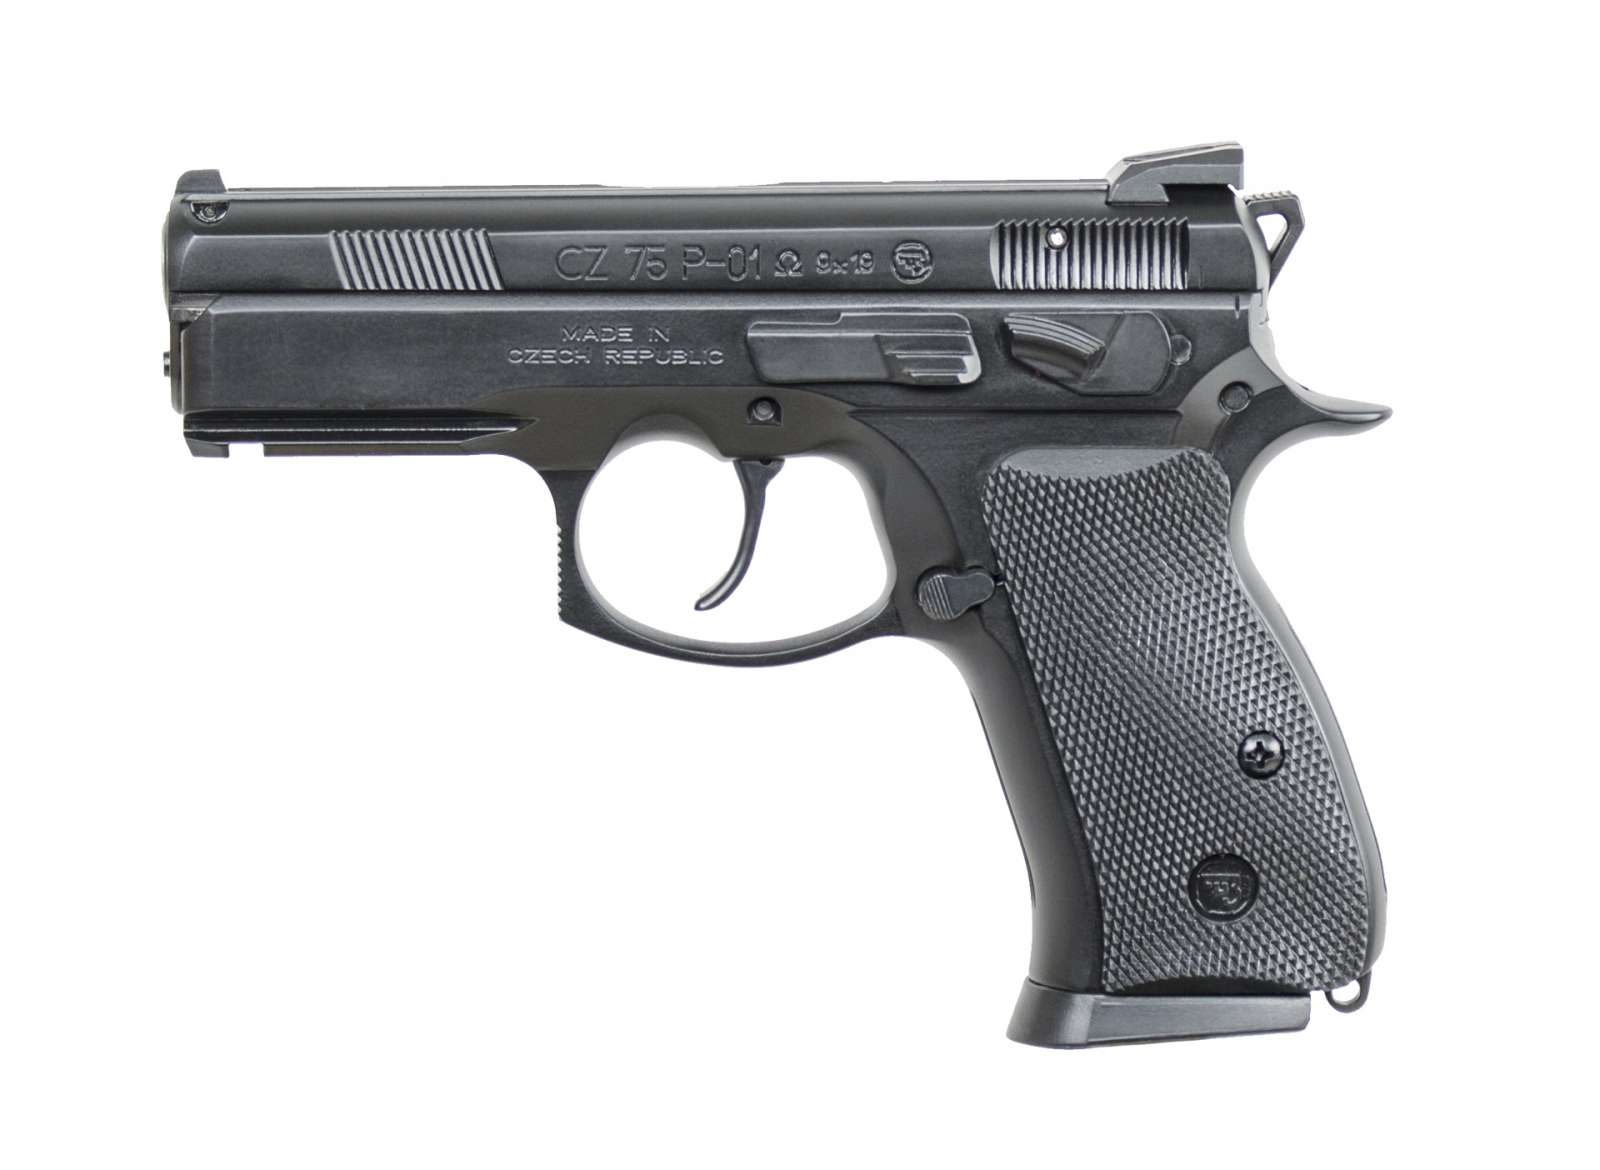 CZ 75 P-01 ? (OMEGA) CONVERTIBLE, 9MM, 15RD, BLK POLYCOAT ALUMINUM, FIXED SIGHTS, SWAPPABLE SAFETY/DECOCKER, BLK RUBBER GRIPS